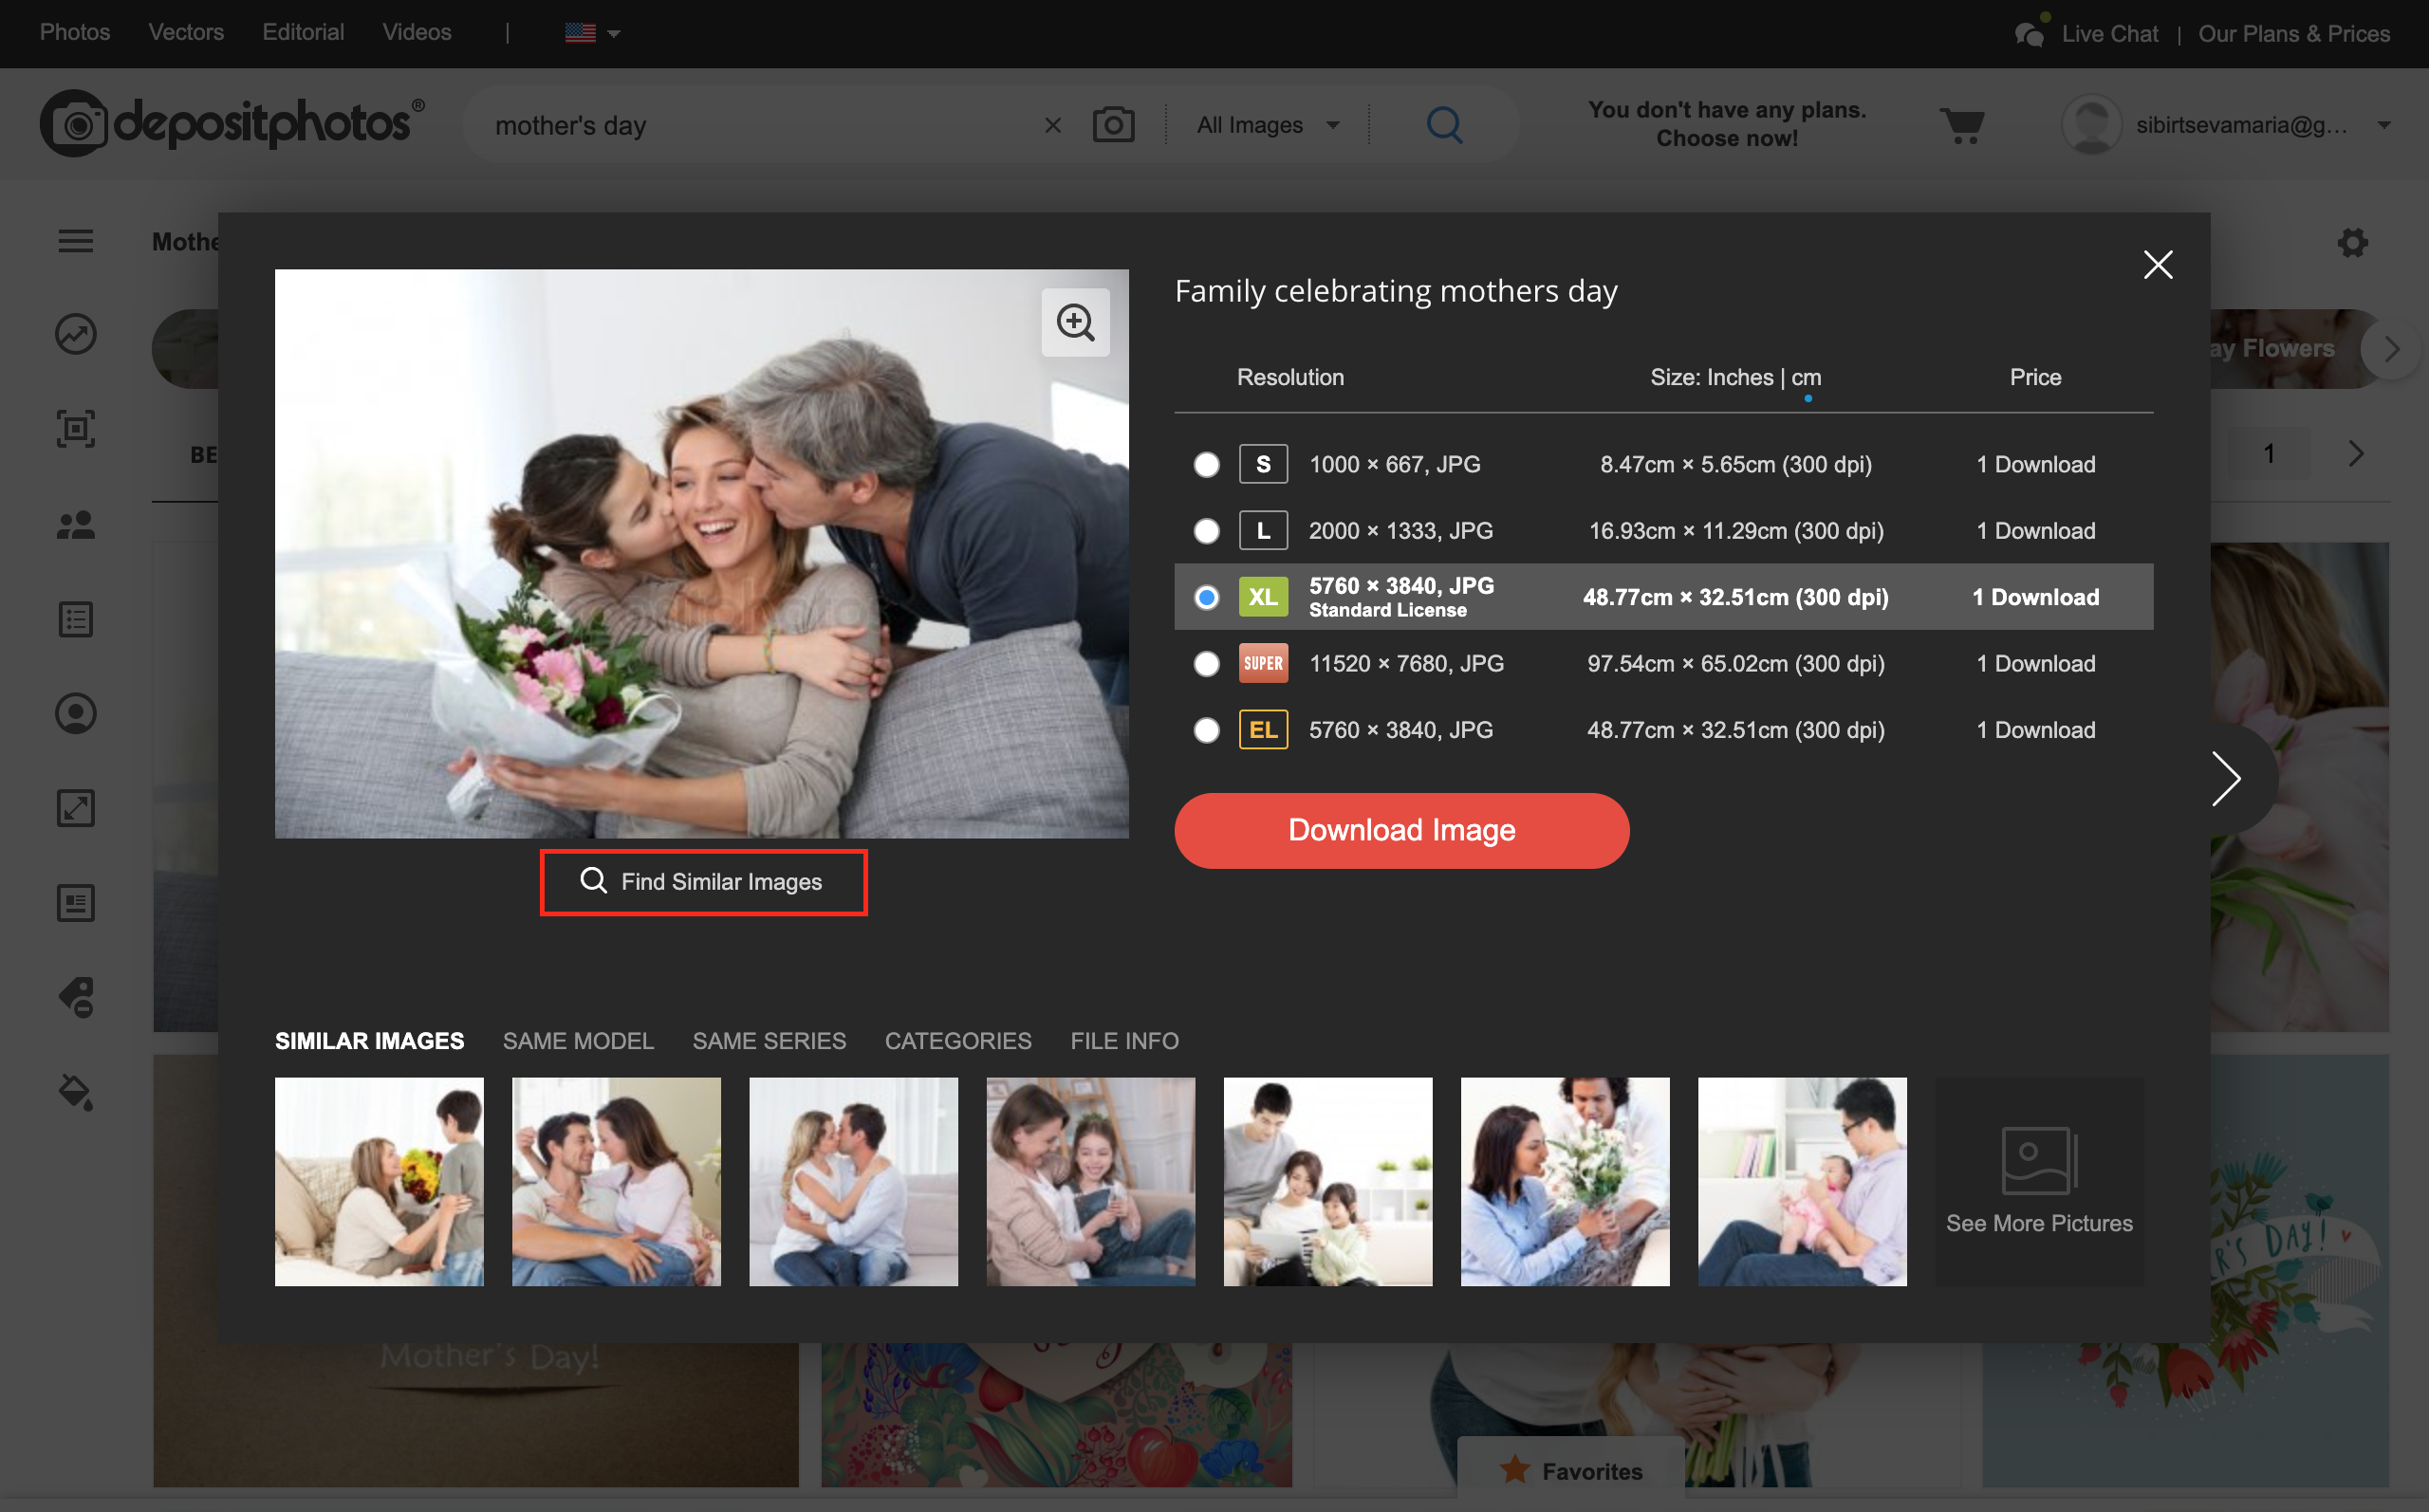 Advanced guide to Depositphotos search